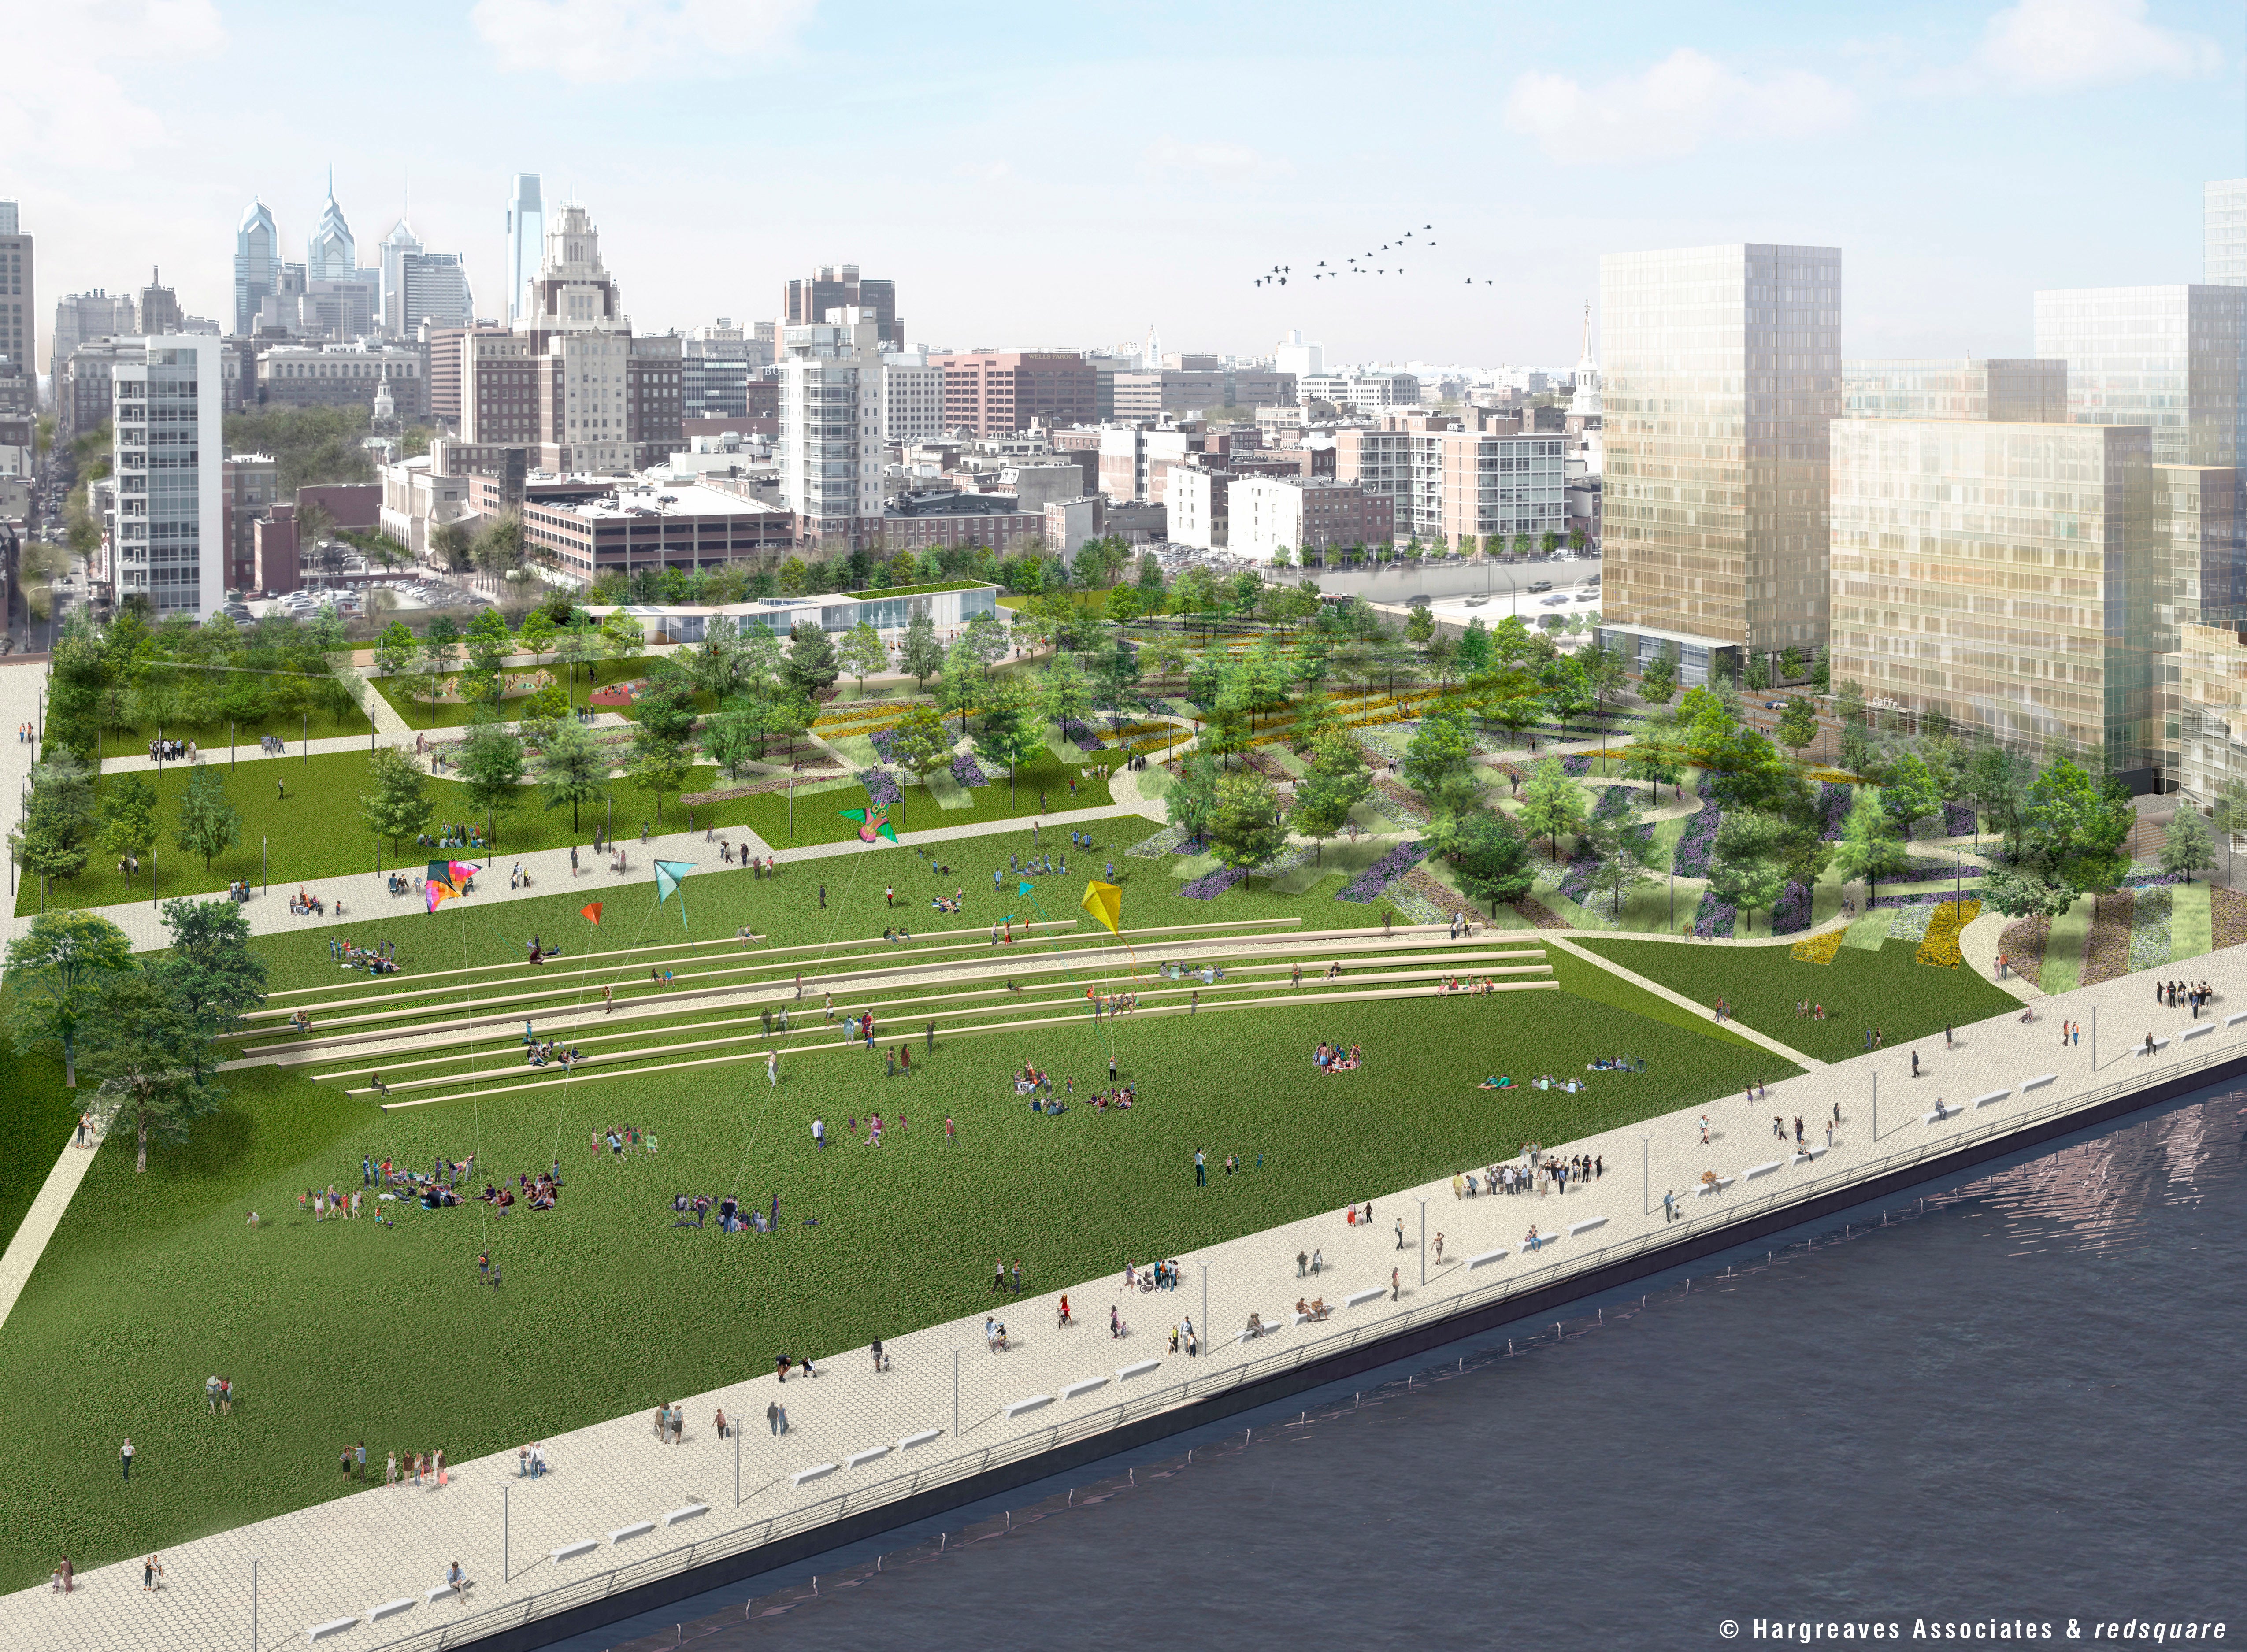 Penns Landing Park by day, © Hargreaves Associates & redsquare